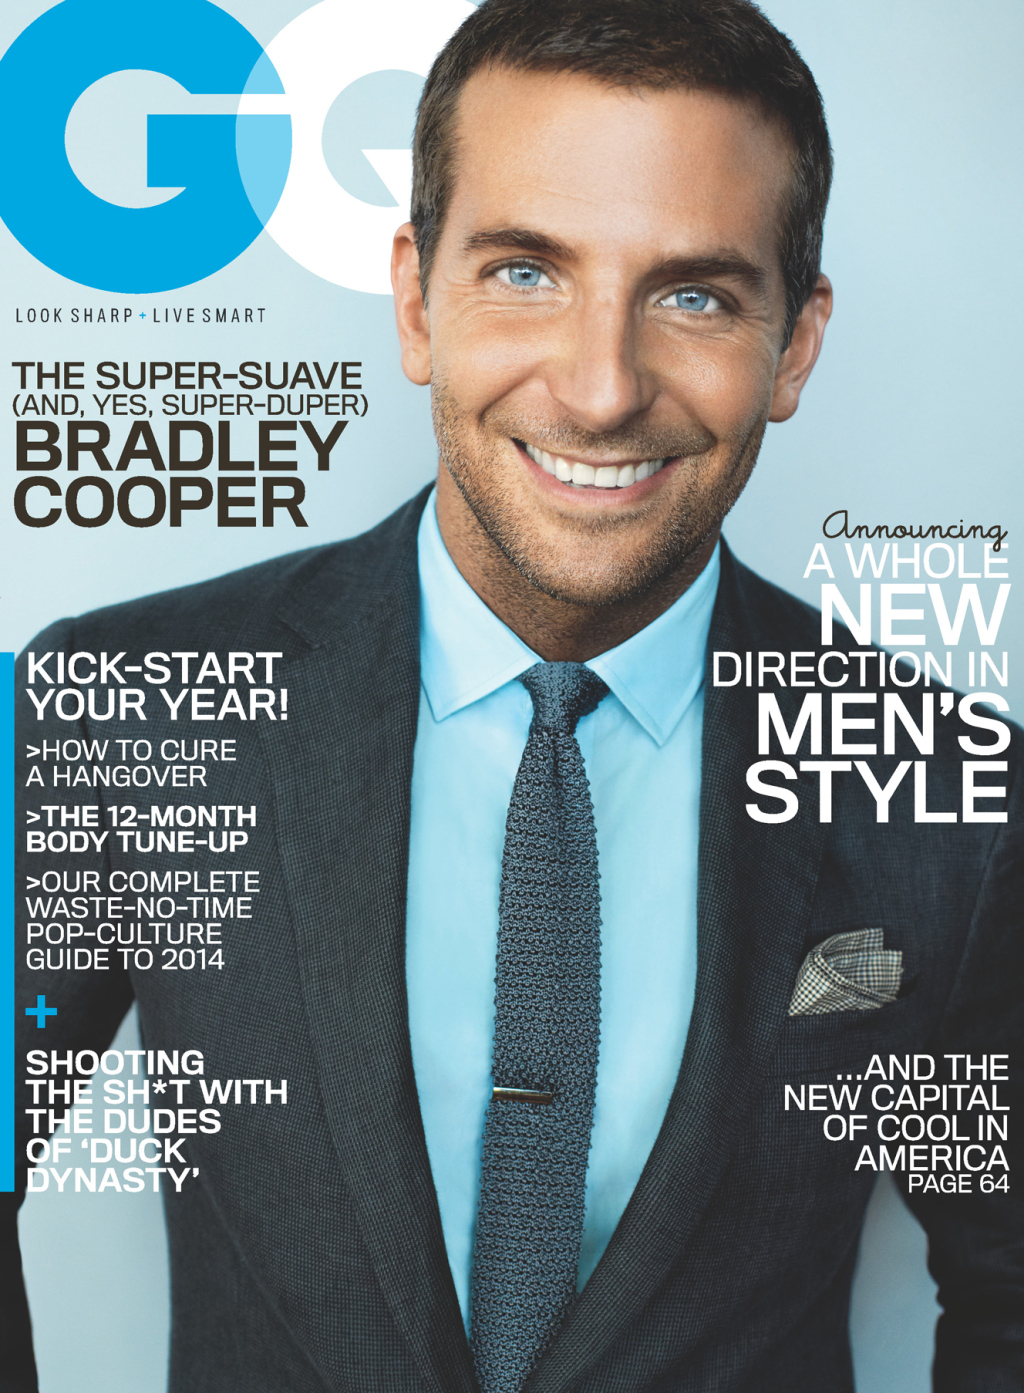 ... his US debut as the magazine&#39;s cover boy, Bradley Cooper looks back on his rise to A-list stardom, in the cover story written by contributor Zach Baron. - gqcv001